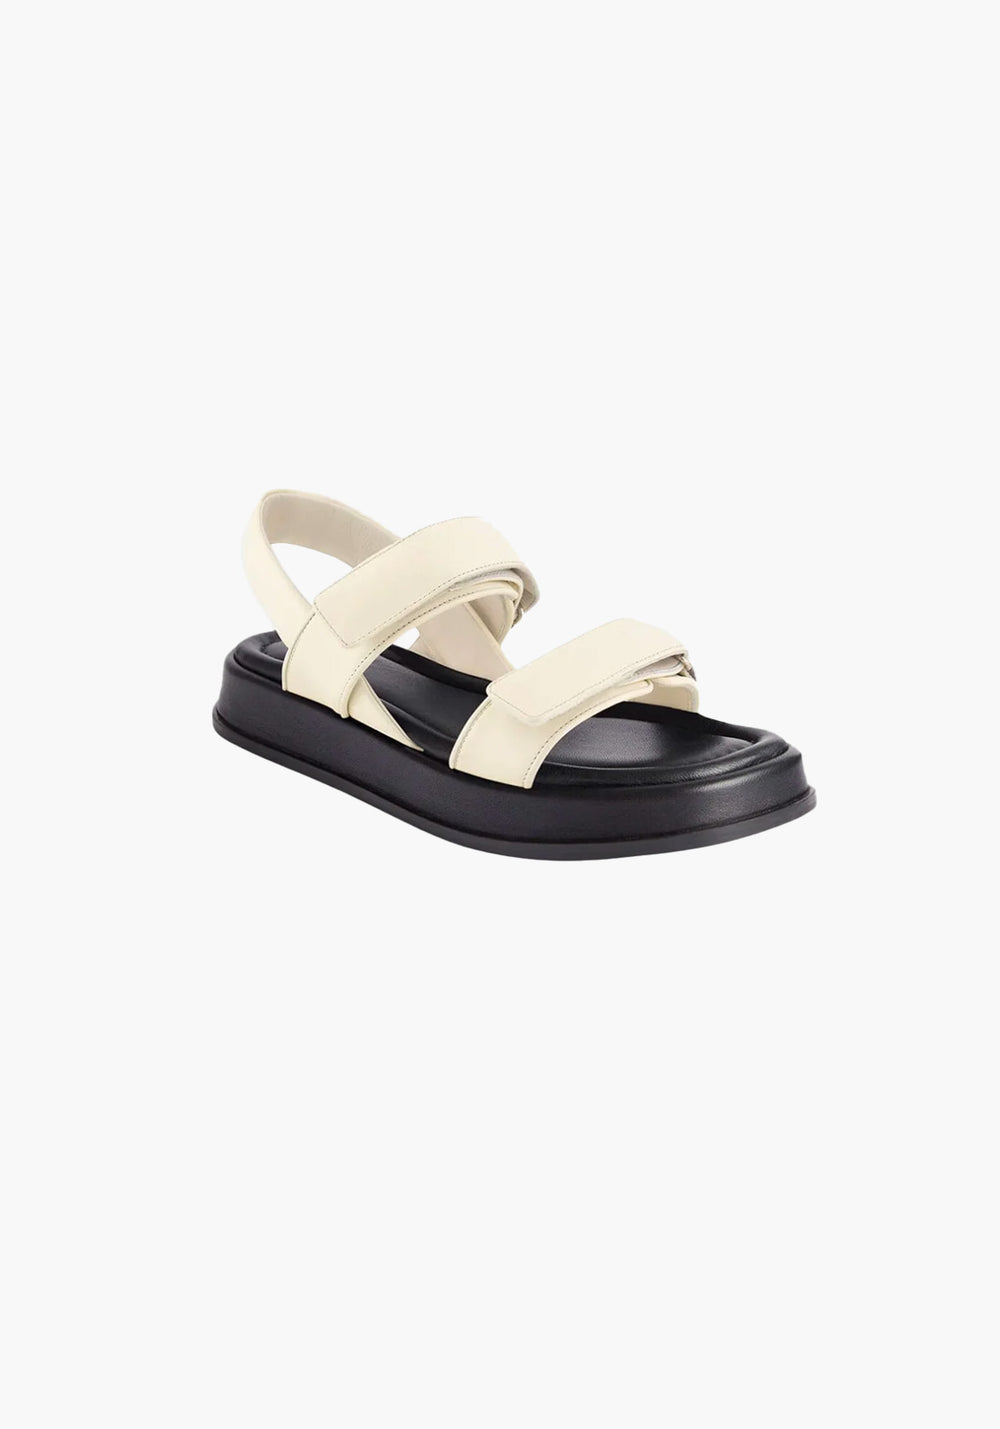 THE SPORTY SANDAL BUTTER